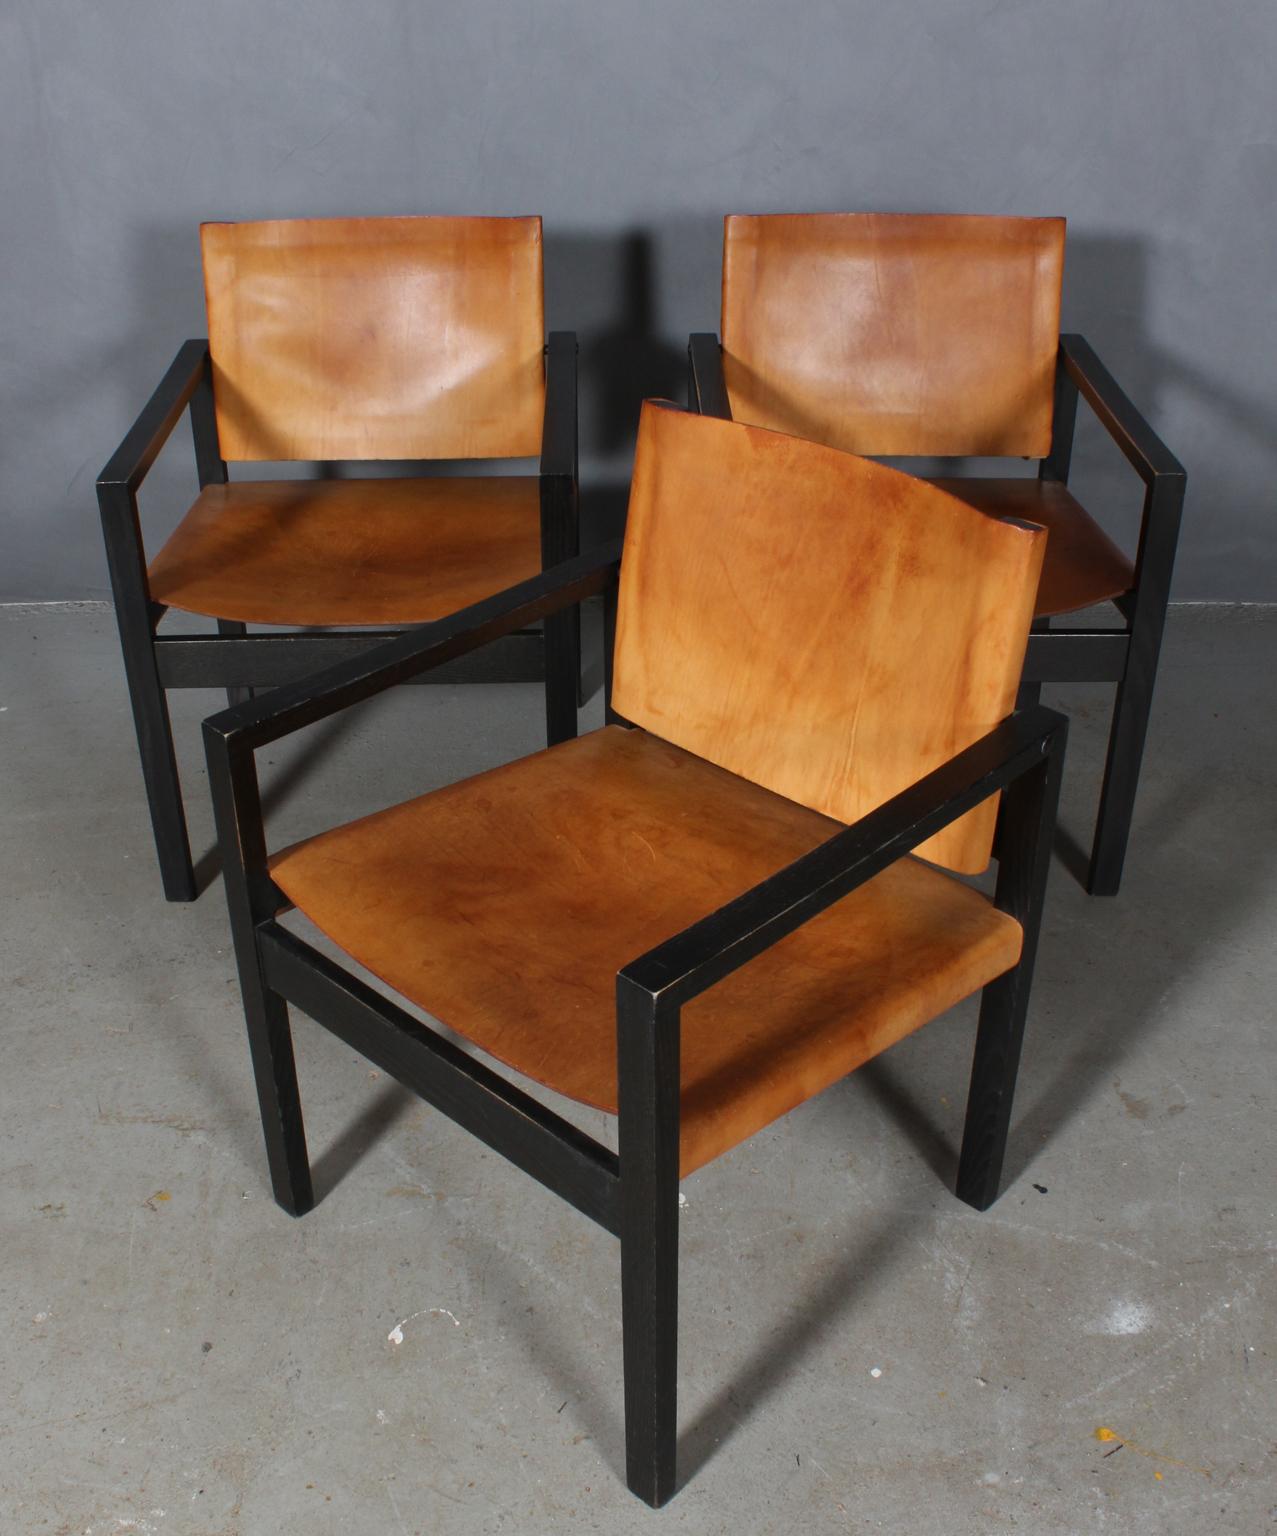 Danish cabinetmaker, armchairs with frame of black stained oak.

Seat and back of saddle leather.